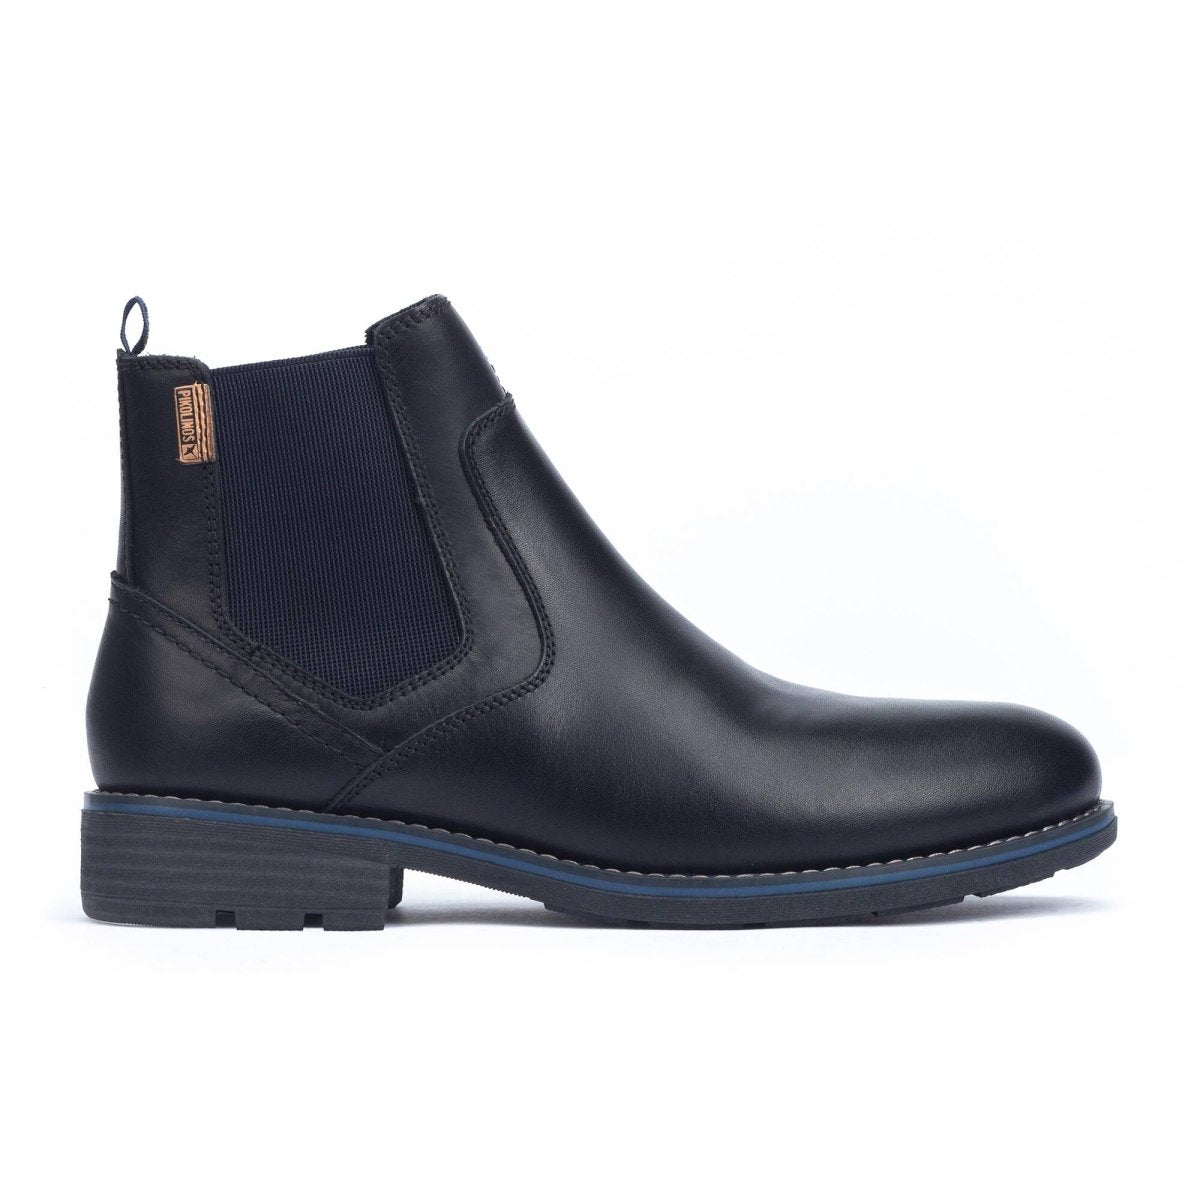 PIKOLINOS YORK M2M-N8318 MEN'S WARM LINING BOOTS IN BLACK - TLW Shoes